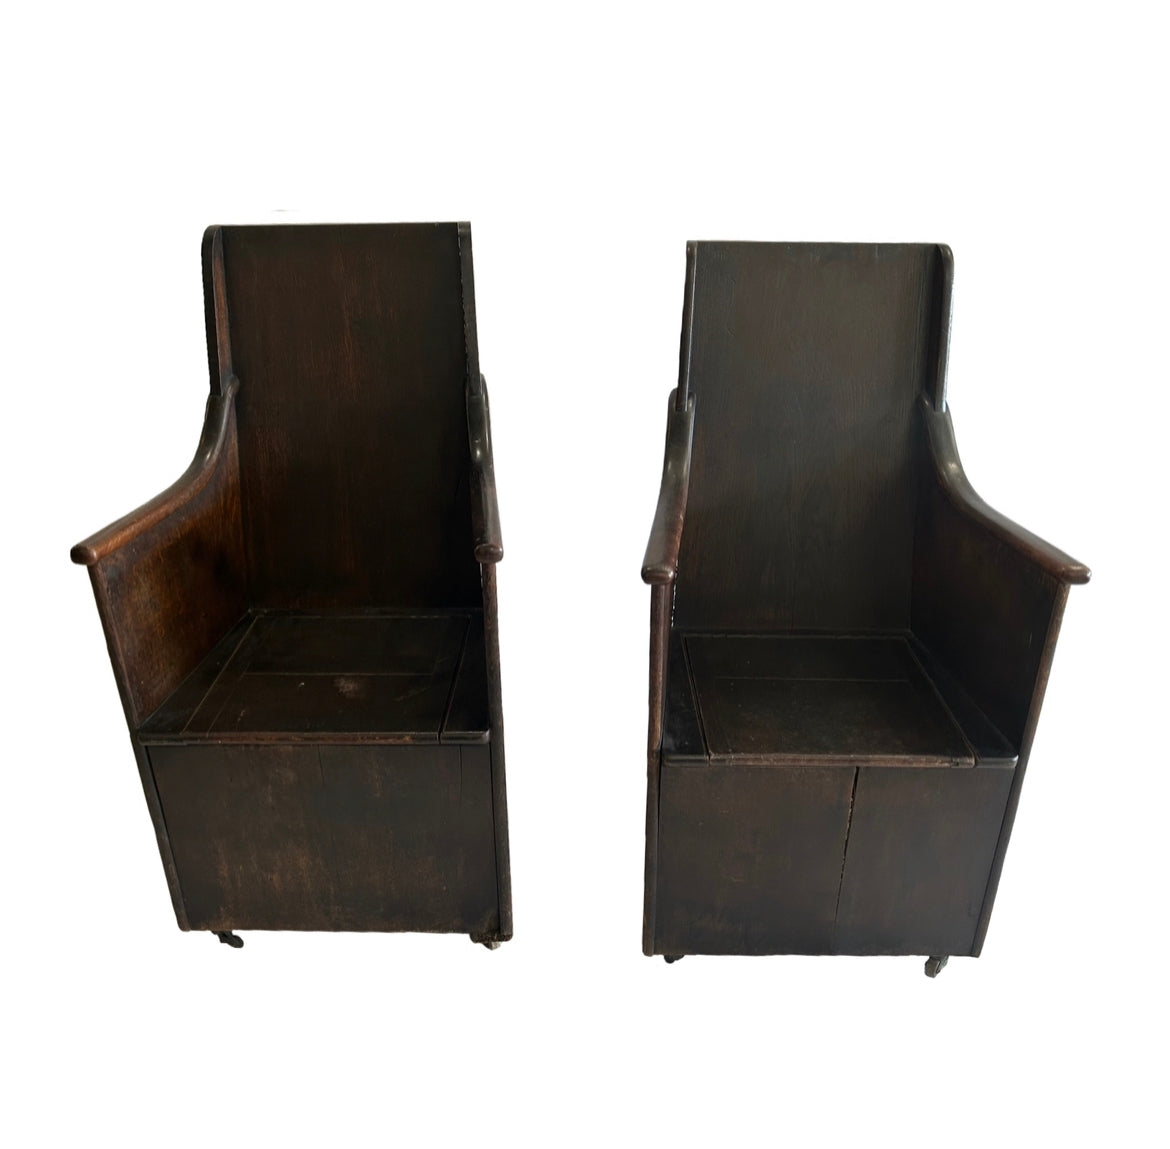 Pair of Vintage Wood Commode Chairs